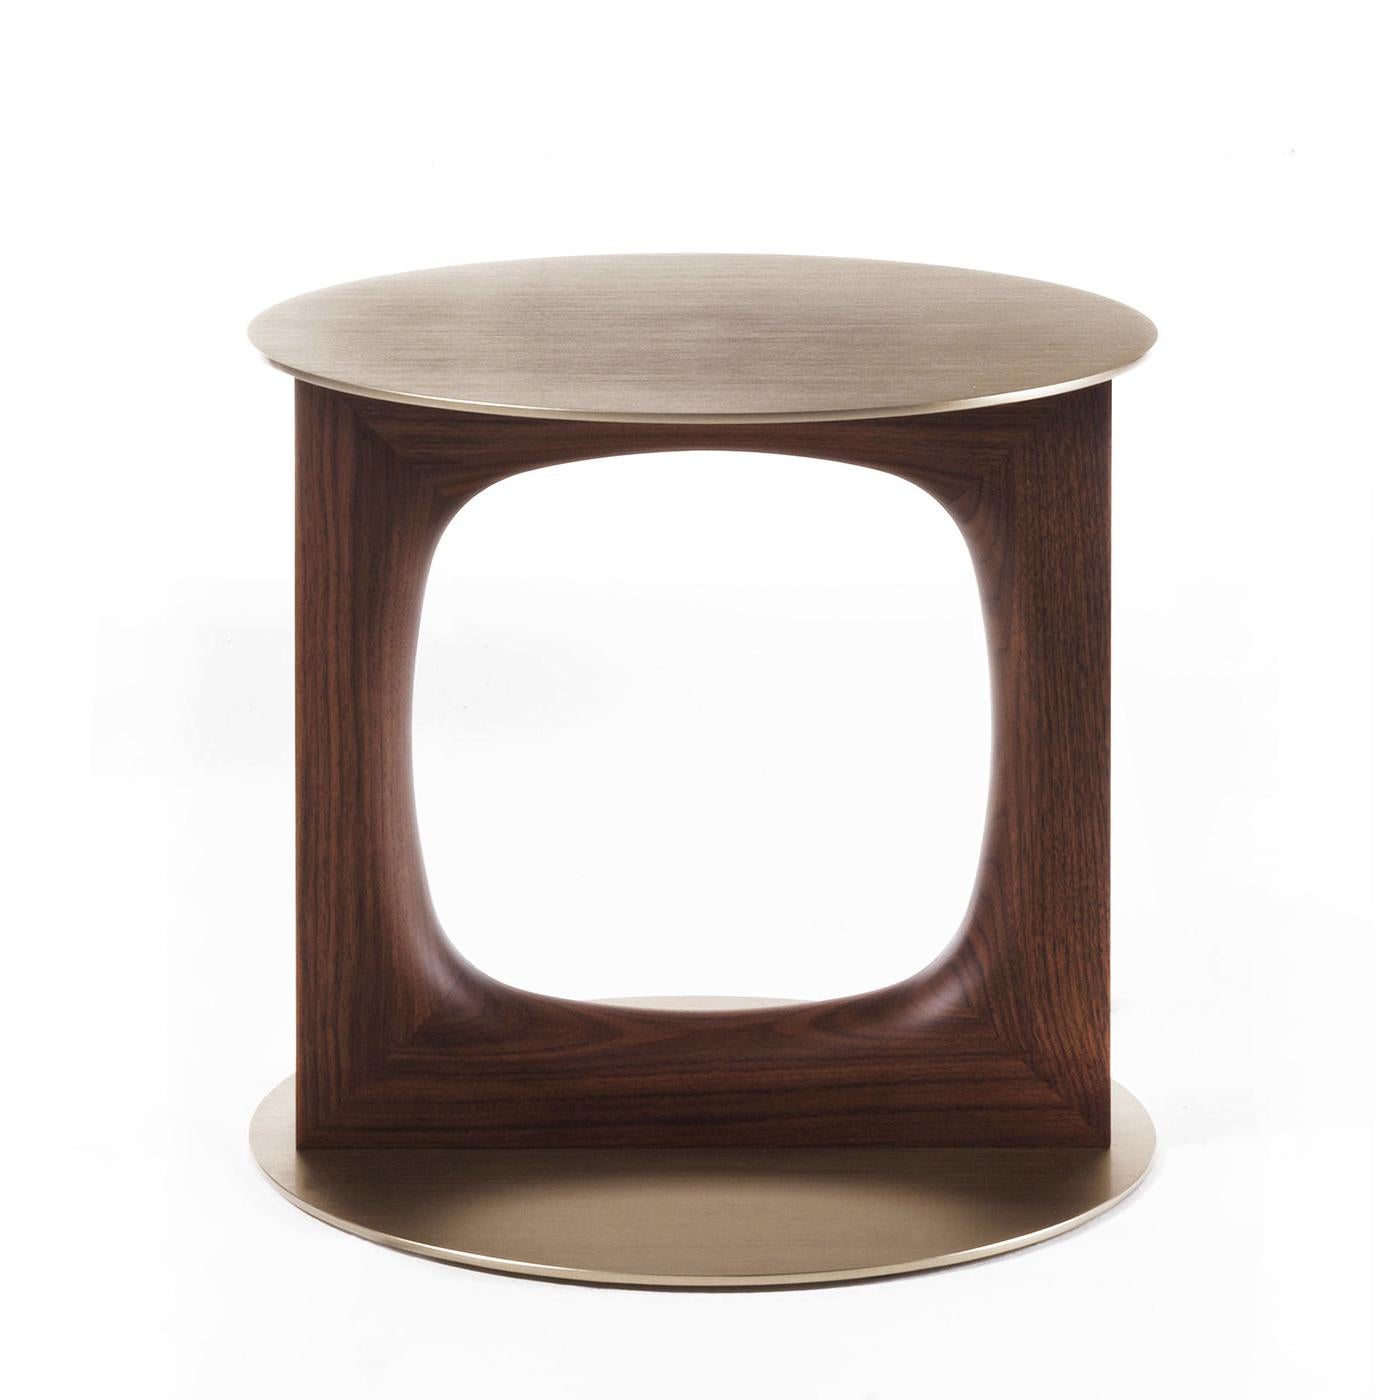 Side table finestret with solid walnut base
and with up and down tops in brushed brass
finish.